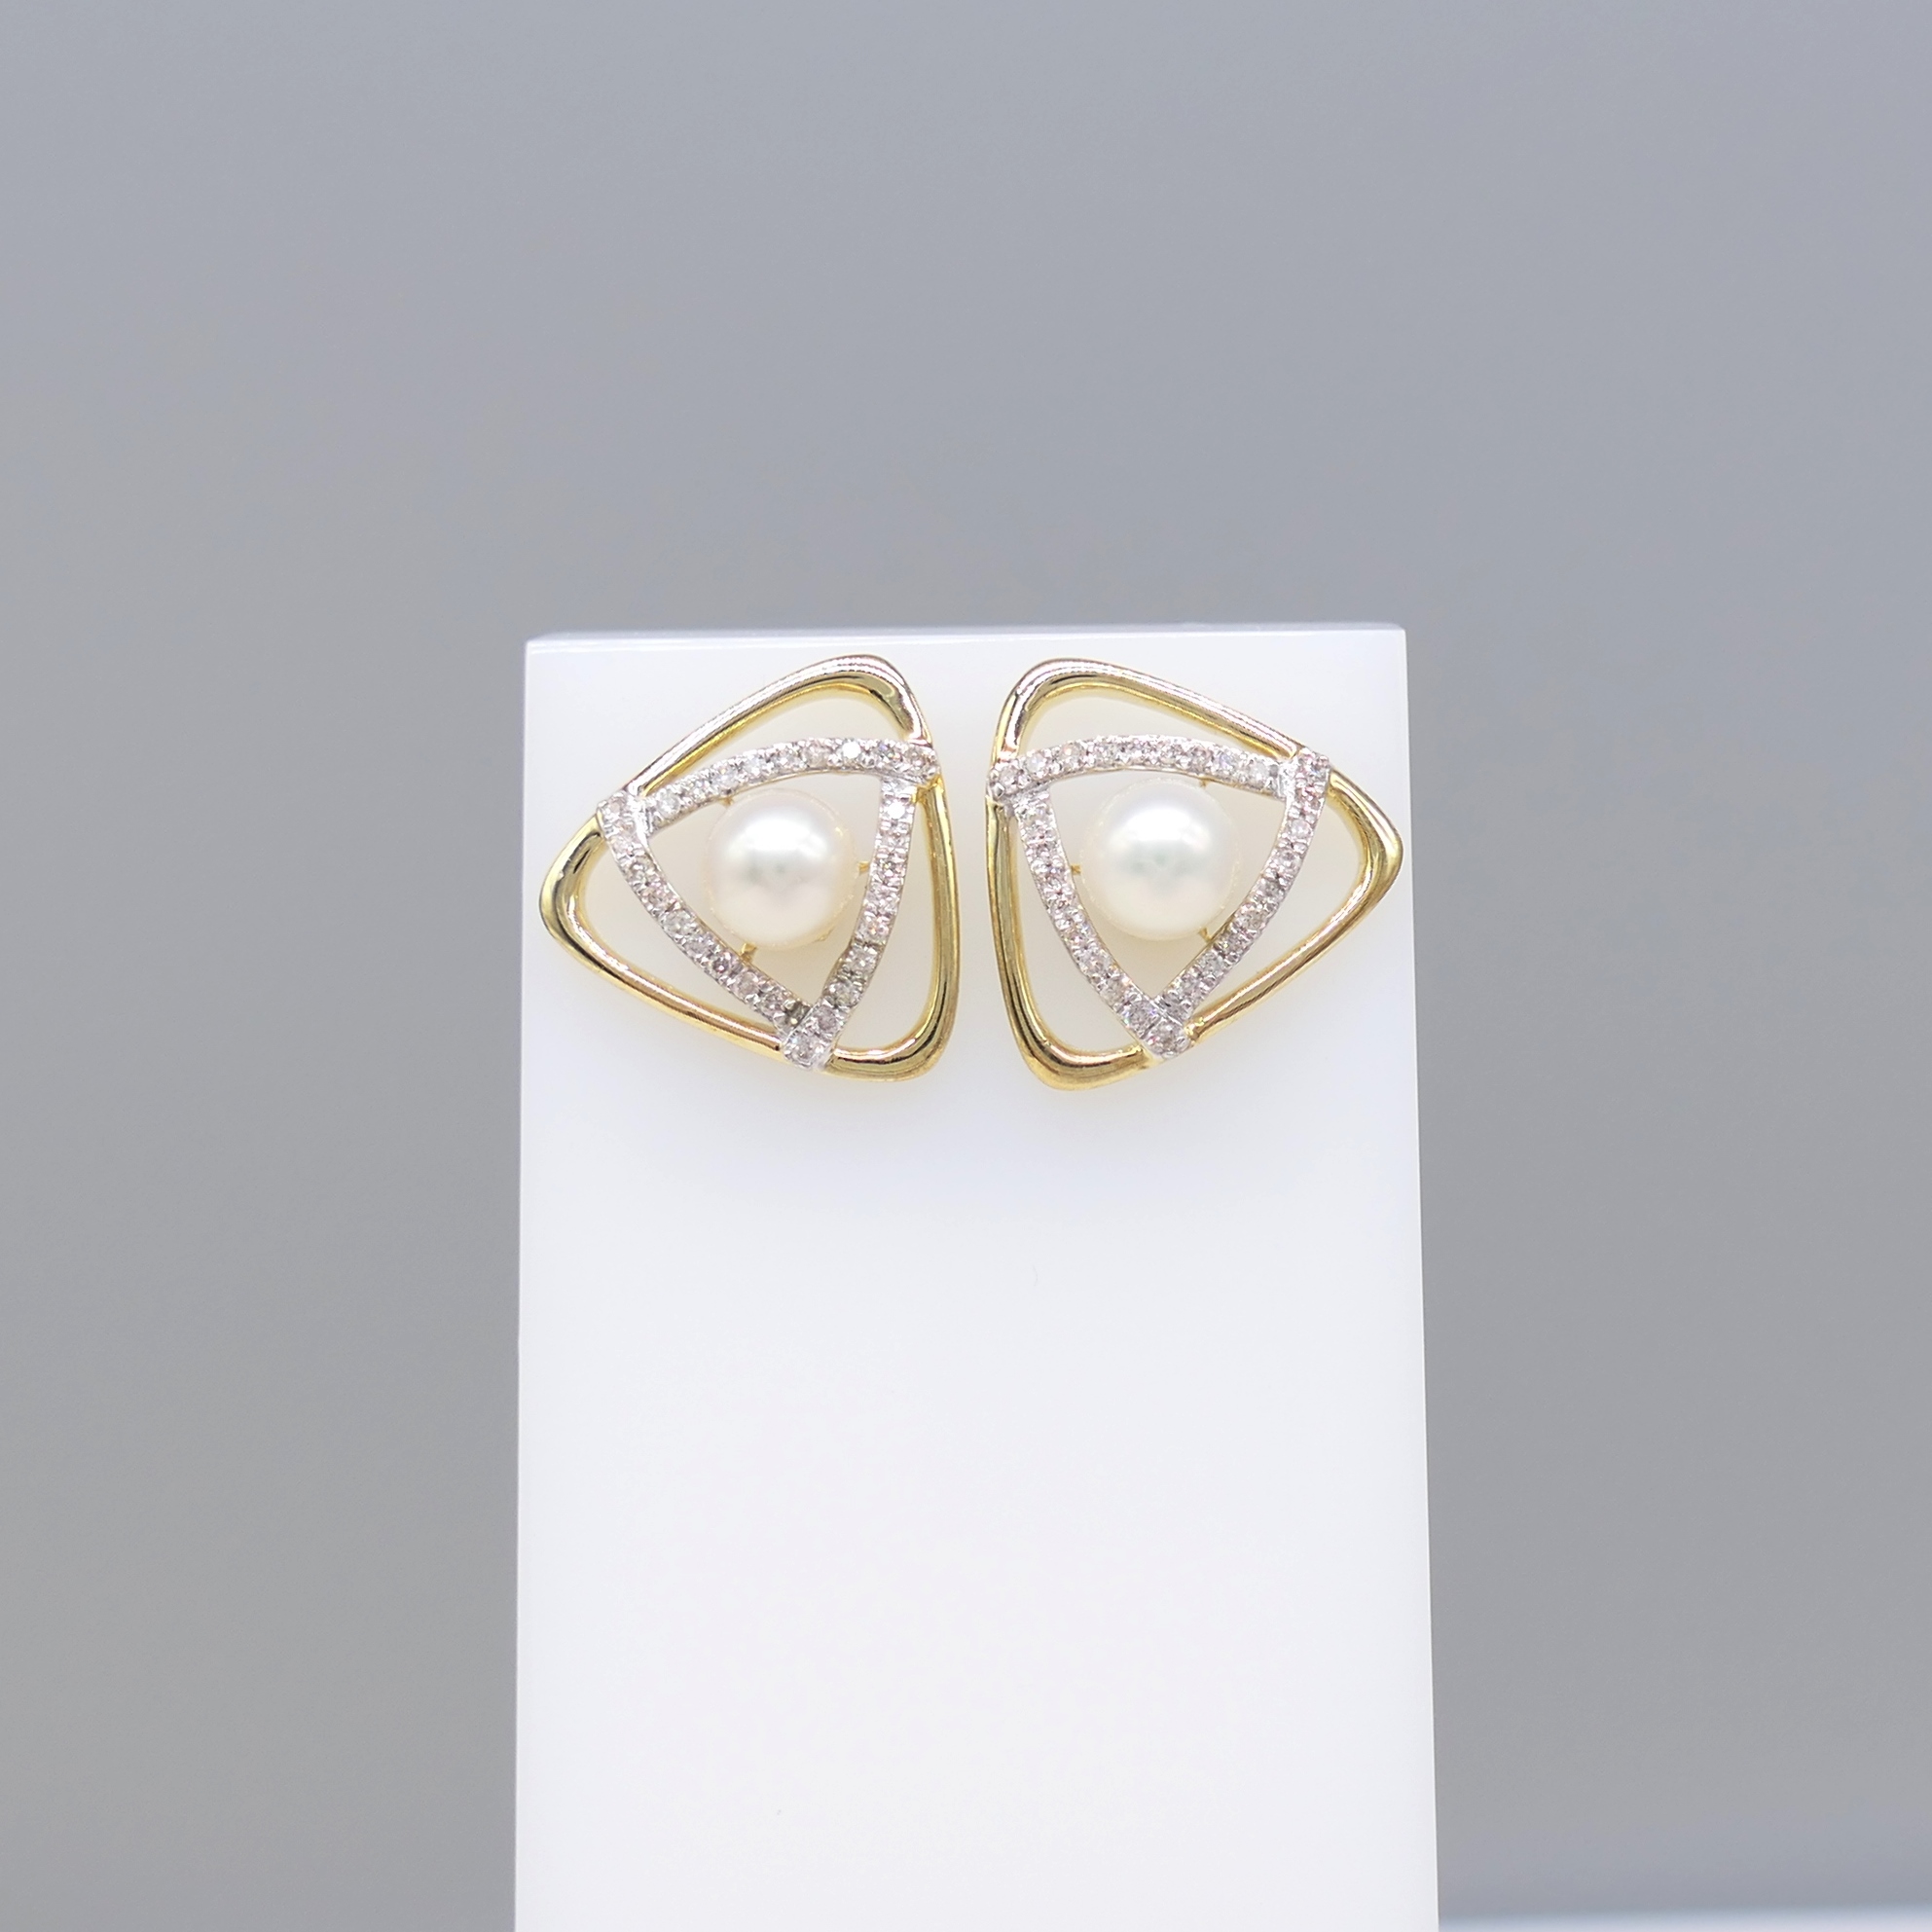 Pair of 9ct Yellow Gold Triangular Ear Studs Set With Cultured Pearls and Diamonds, Boxed - Image 3 of 5